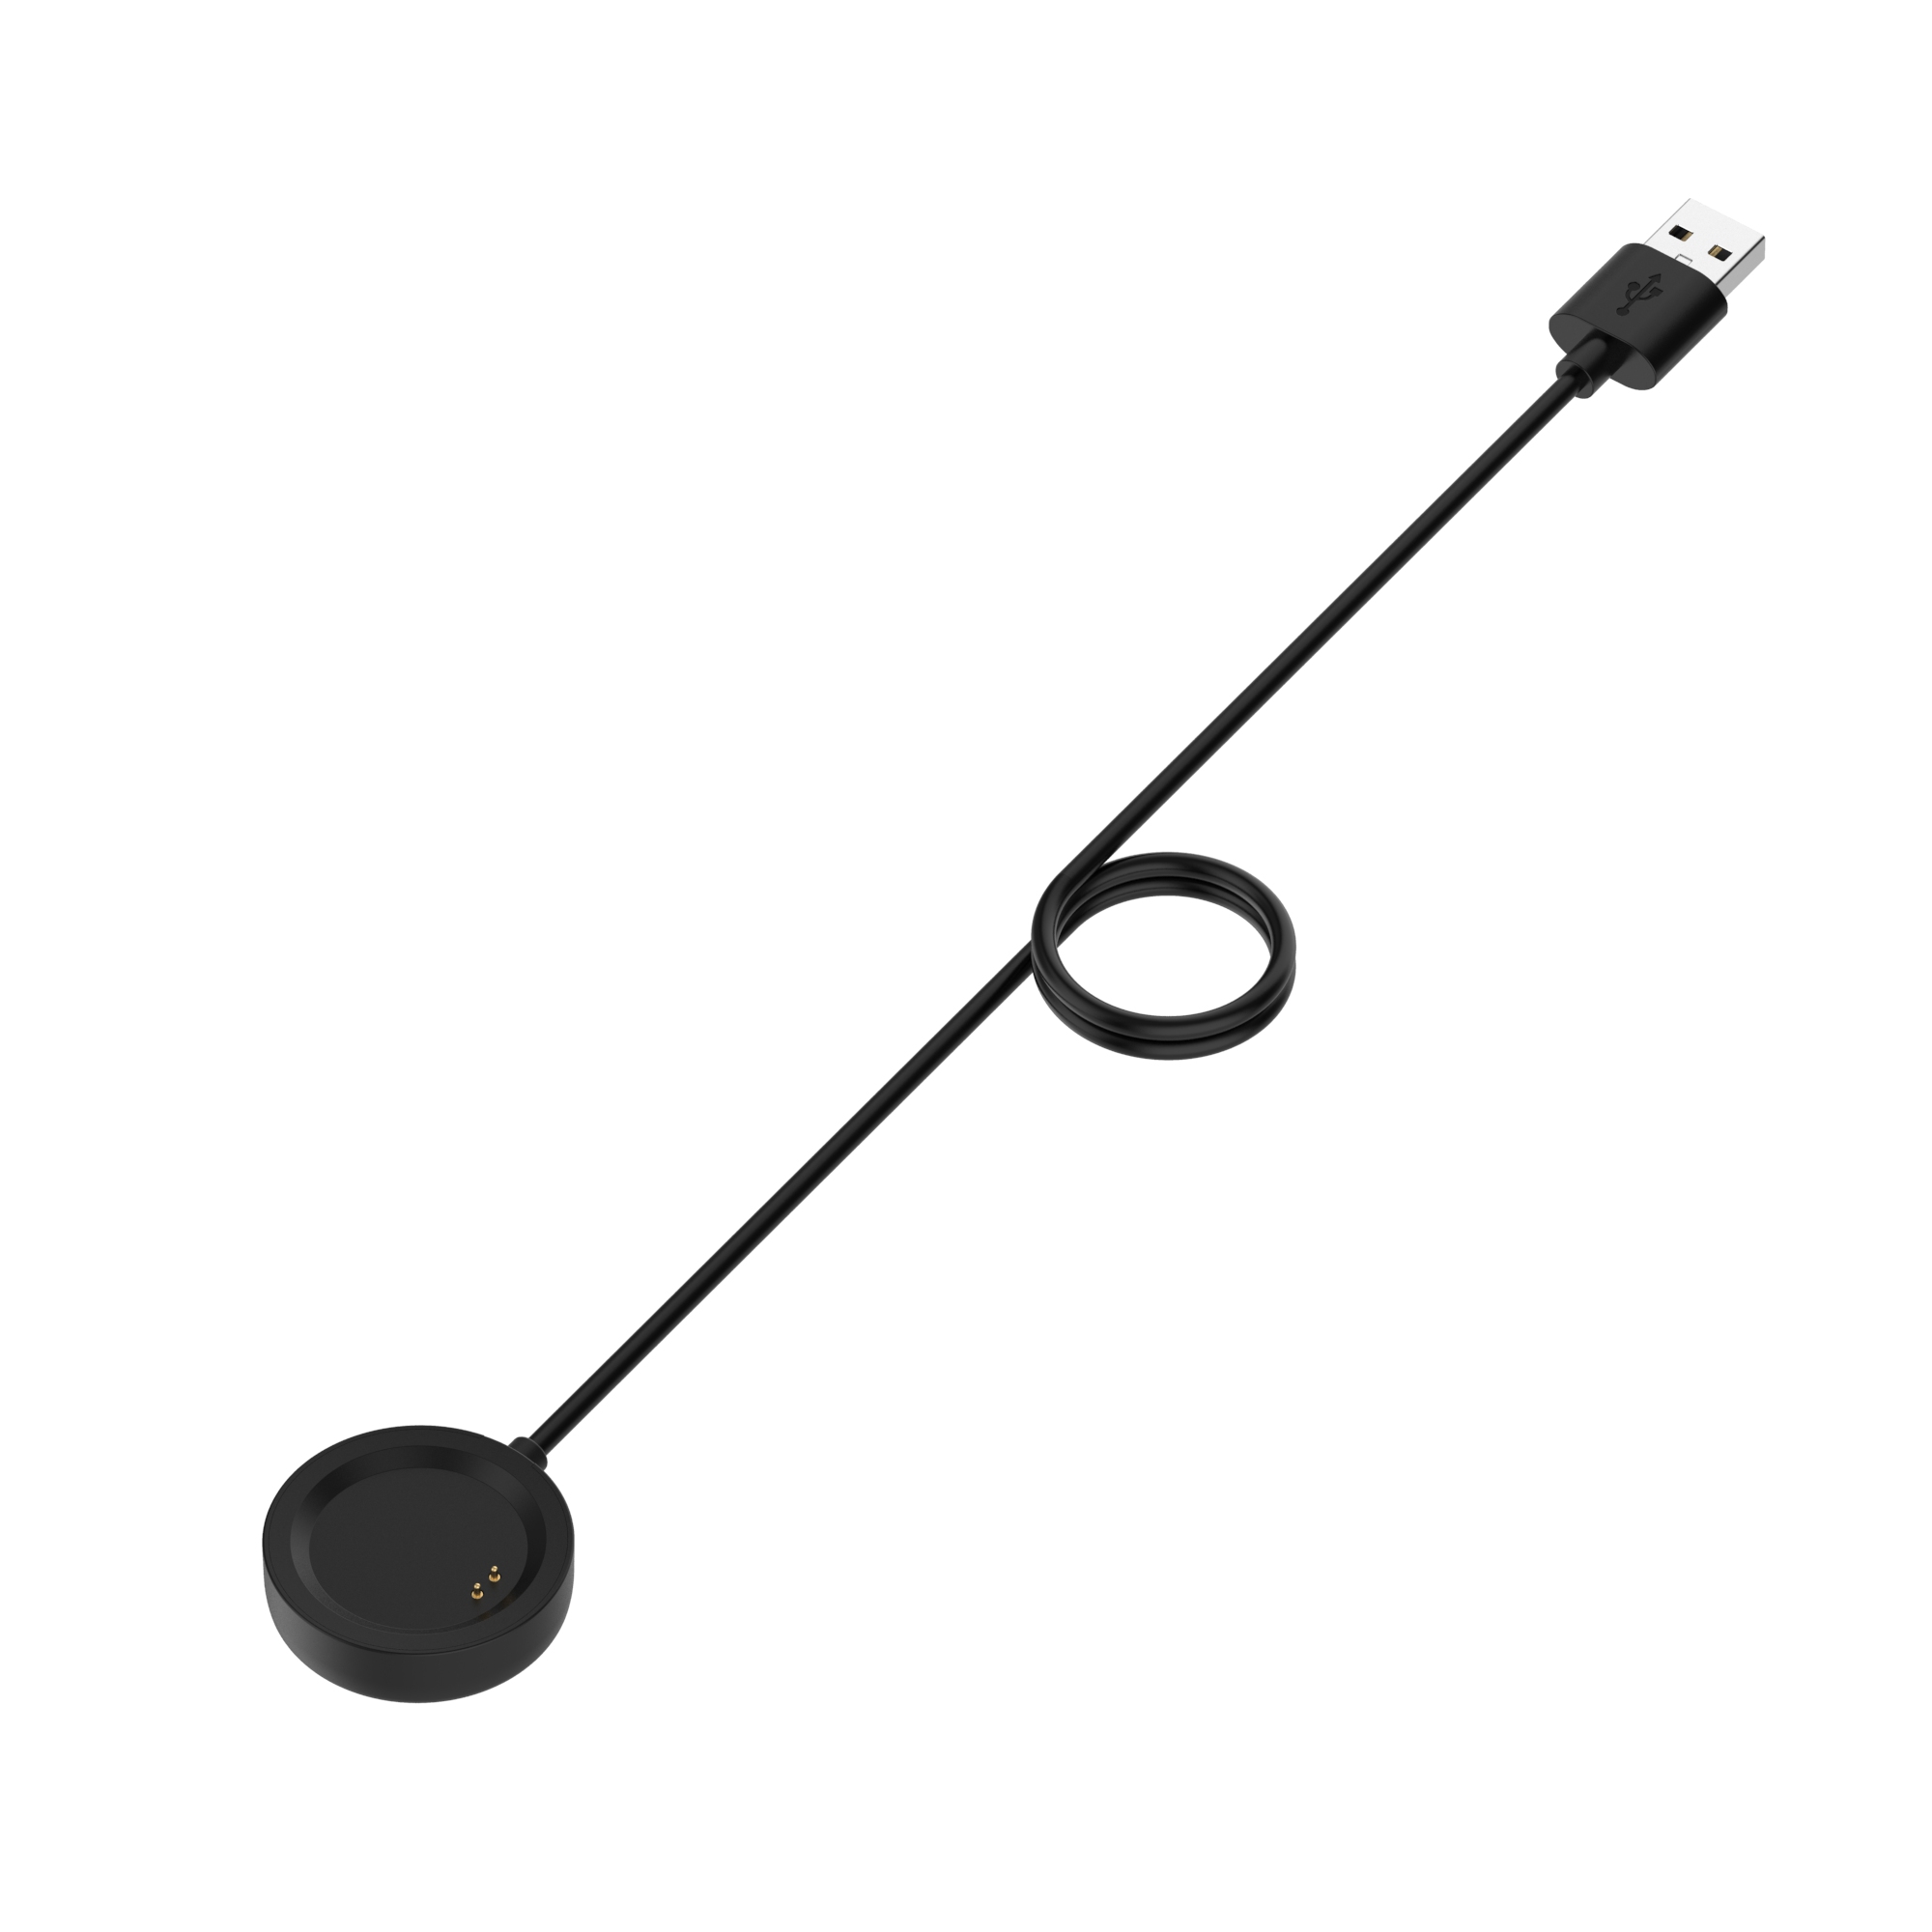 Bakeey-1m-Watch-Cable-Charging-Cable-for-Oneplus-Watch-1862266-4